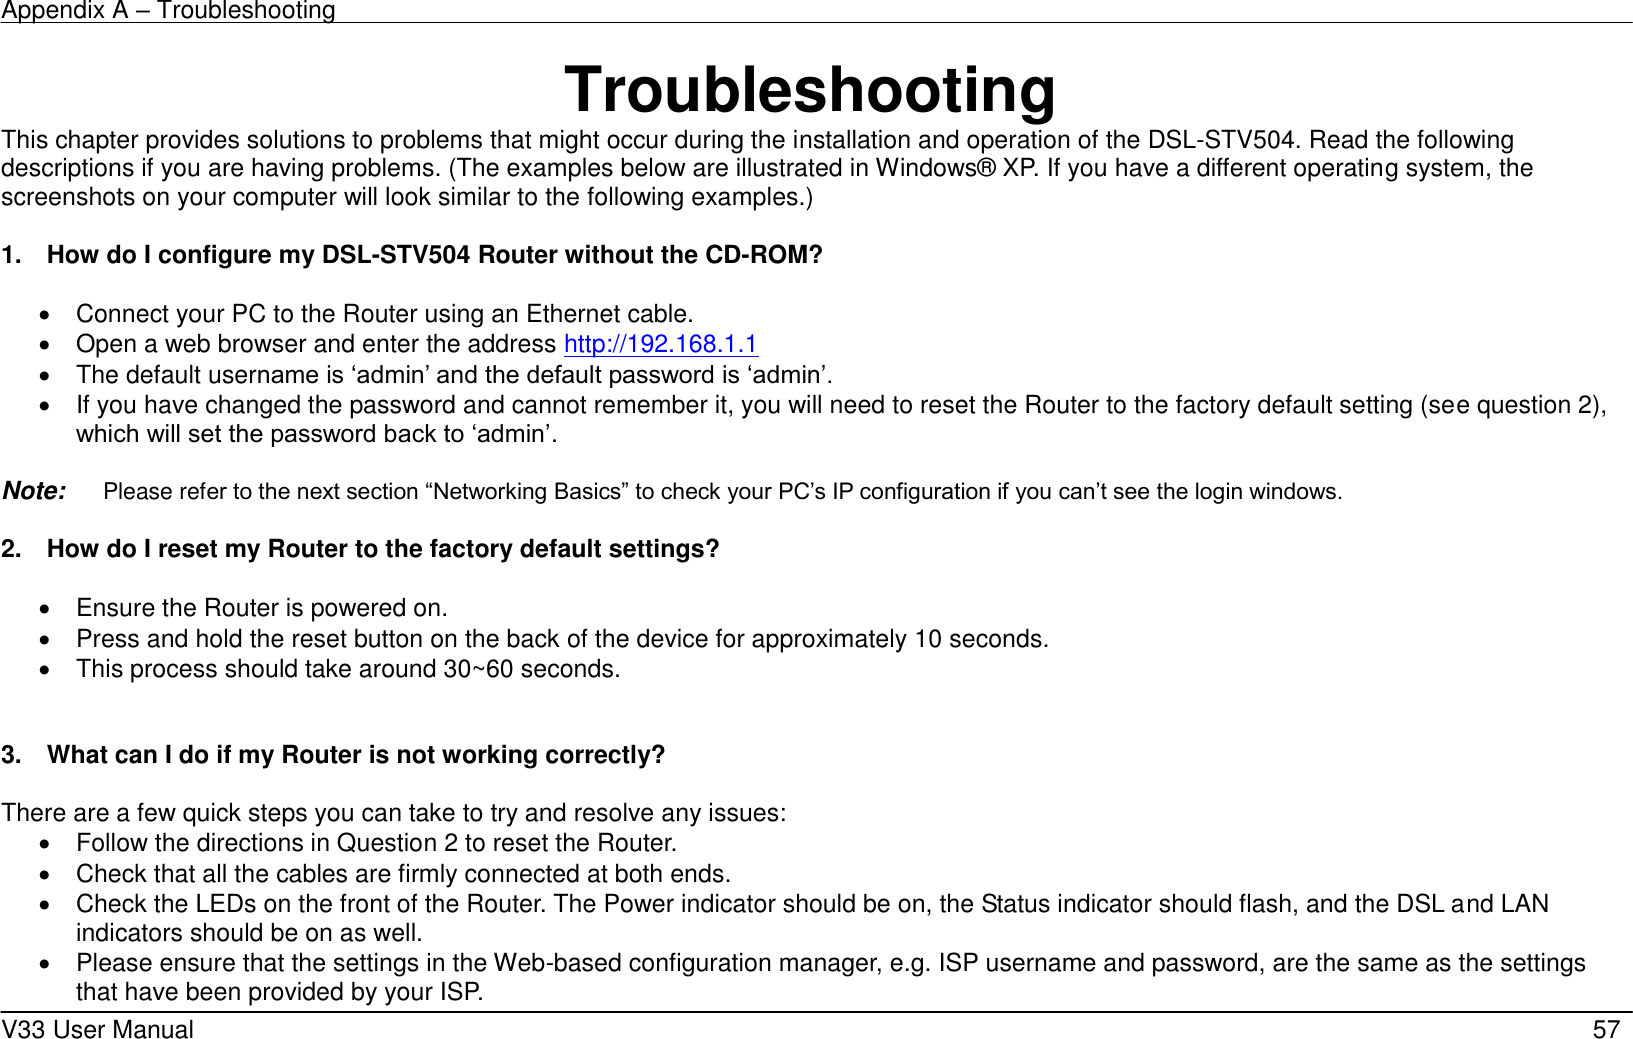 Appendix A – Troubleshooting    V33 User Manual   57 Troubleshooting This chapter provides solutions to problems that might occur during the installation and operation of the DSL-STV504. Read the following descriptions if you are having problems. (The examples below are illustrated in Windows® XP. If you have a different operating system, the screenshots on your computer will look similar to the following examples.)  1.    How do I configure my DSL-STV504 Router without the CD-ROM?    Connect your PC to the Router using an Ethernet cable.   Open a web browser and enter the address http://192.168.1.1     The default username is ‘admin’ and the default password is ‘admin’.   If you have changed the password and cannot remember it, you will need to reset the Router to the factory default setting (see question 2), which will set the password back to ‘admin’.  Note:    Please refer to the next section “Networking Basics” to check your PC’s IP configuration if you can’t see the login windows.  2.    How do I reset my Router to the factory default settings?    Ensure the Router is powered on.   Press and hold the reset button on the back of the device for approximately 10 seconds.   This process should take around 30~60 seconds.     3.    What can I do if my Router is not working correctly?  There are a few quick steps you can take to try and resolve any issues:   Follow the directions in Question 2 to reset the Router.   Check that all the cables are firmly connected at both ends.   Check the LEDs on the front of the Router. The Power indicator should be on, the Status indicator should flash, and the DSL and LAN indicators should be on as well.   Please ensure that the settings in the Web-based configuration manager, e.g. ISP username and password, are the same as the settings that have been provided by your ISP.   